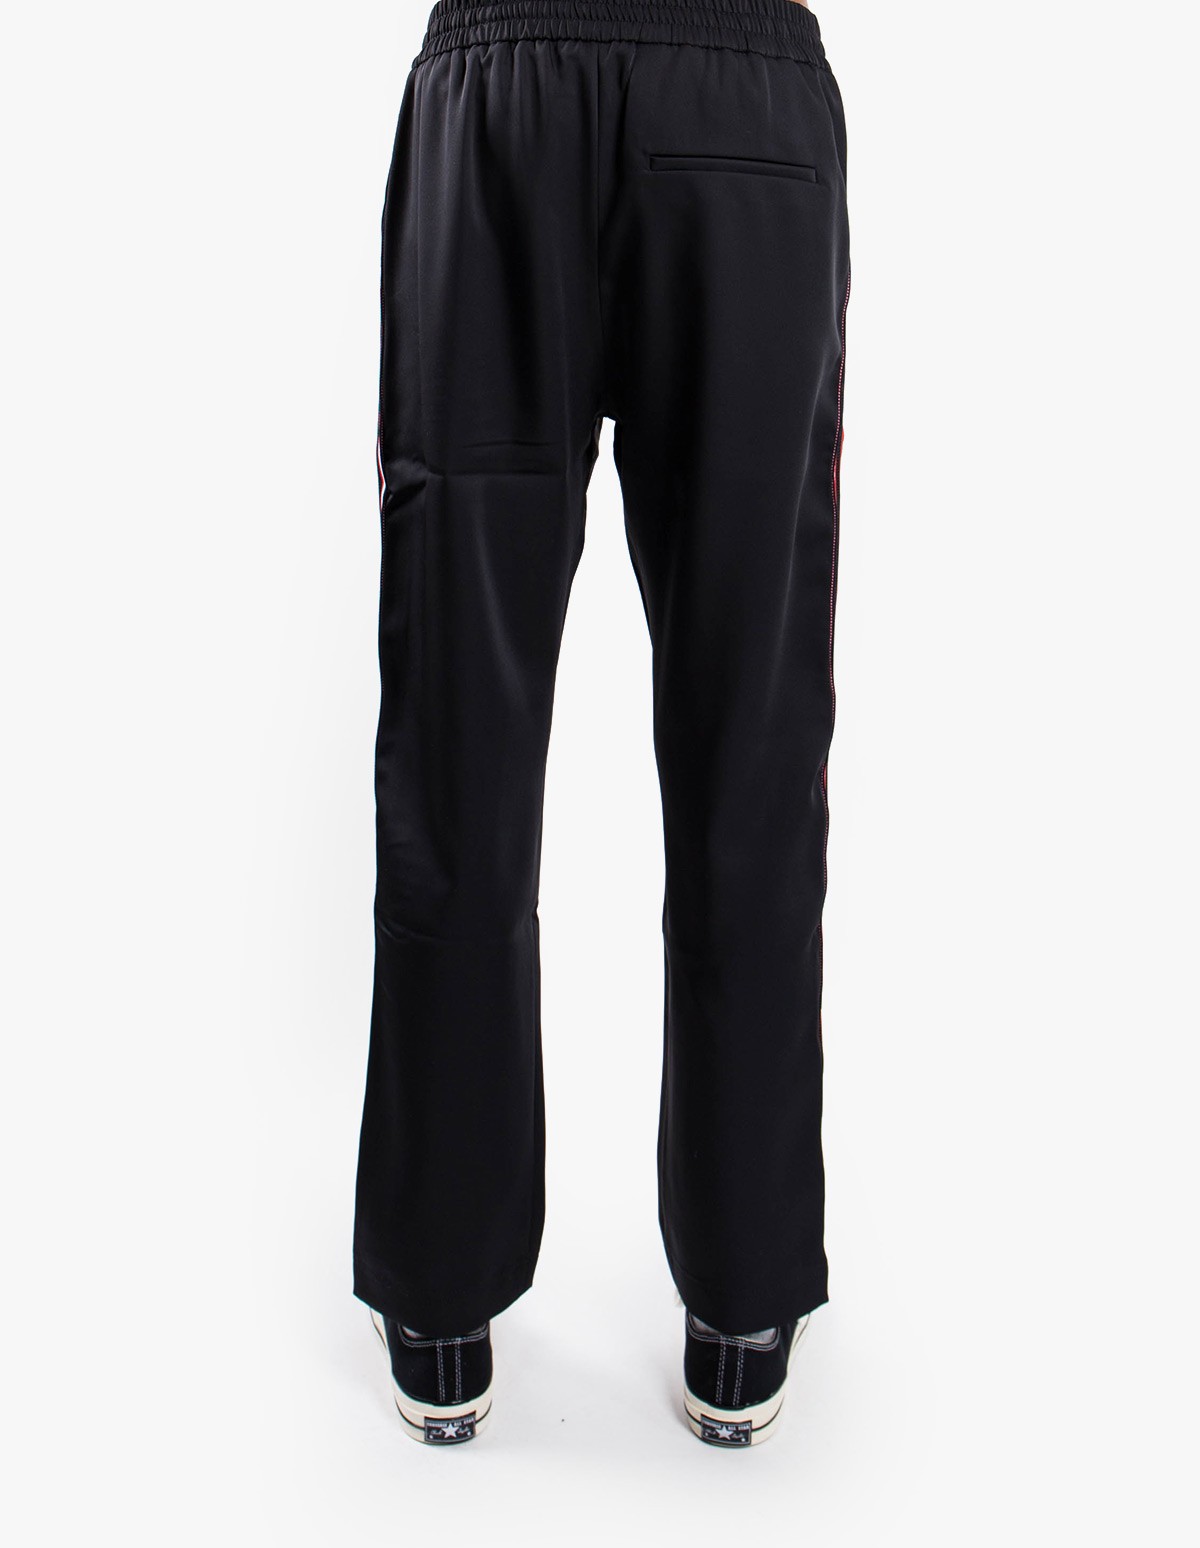 CMMN SWDN Buck Track Pants in Black / Red